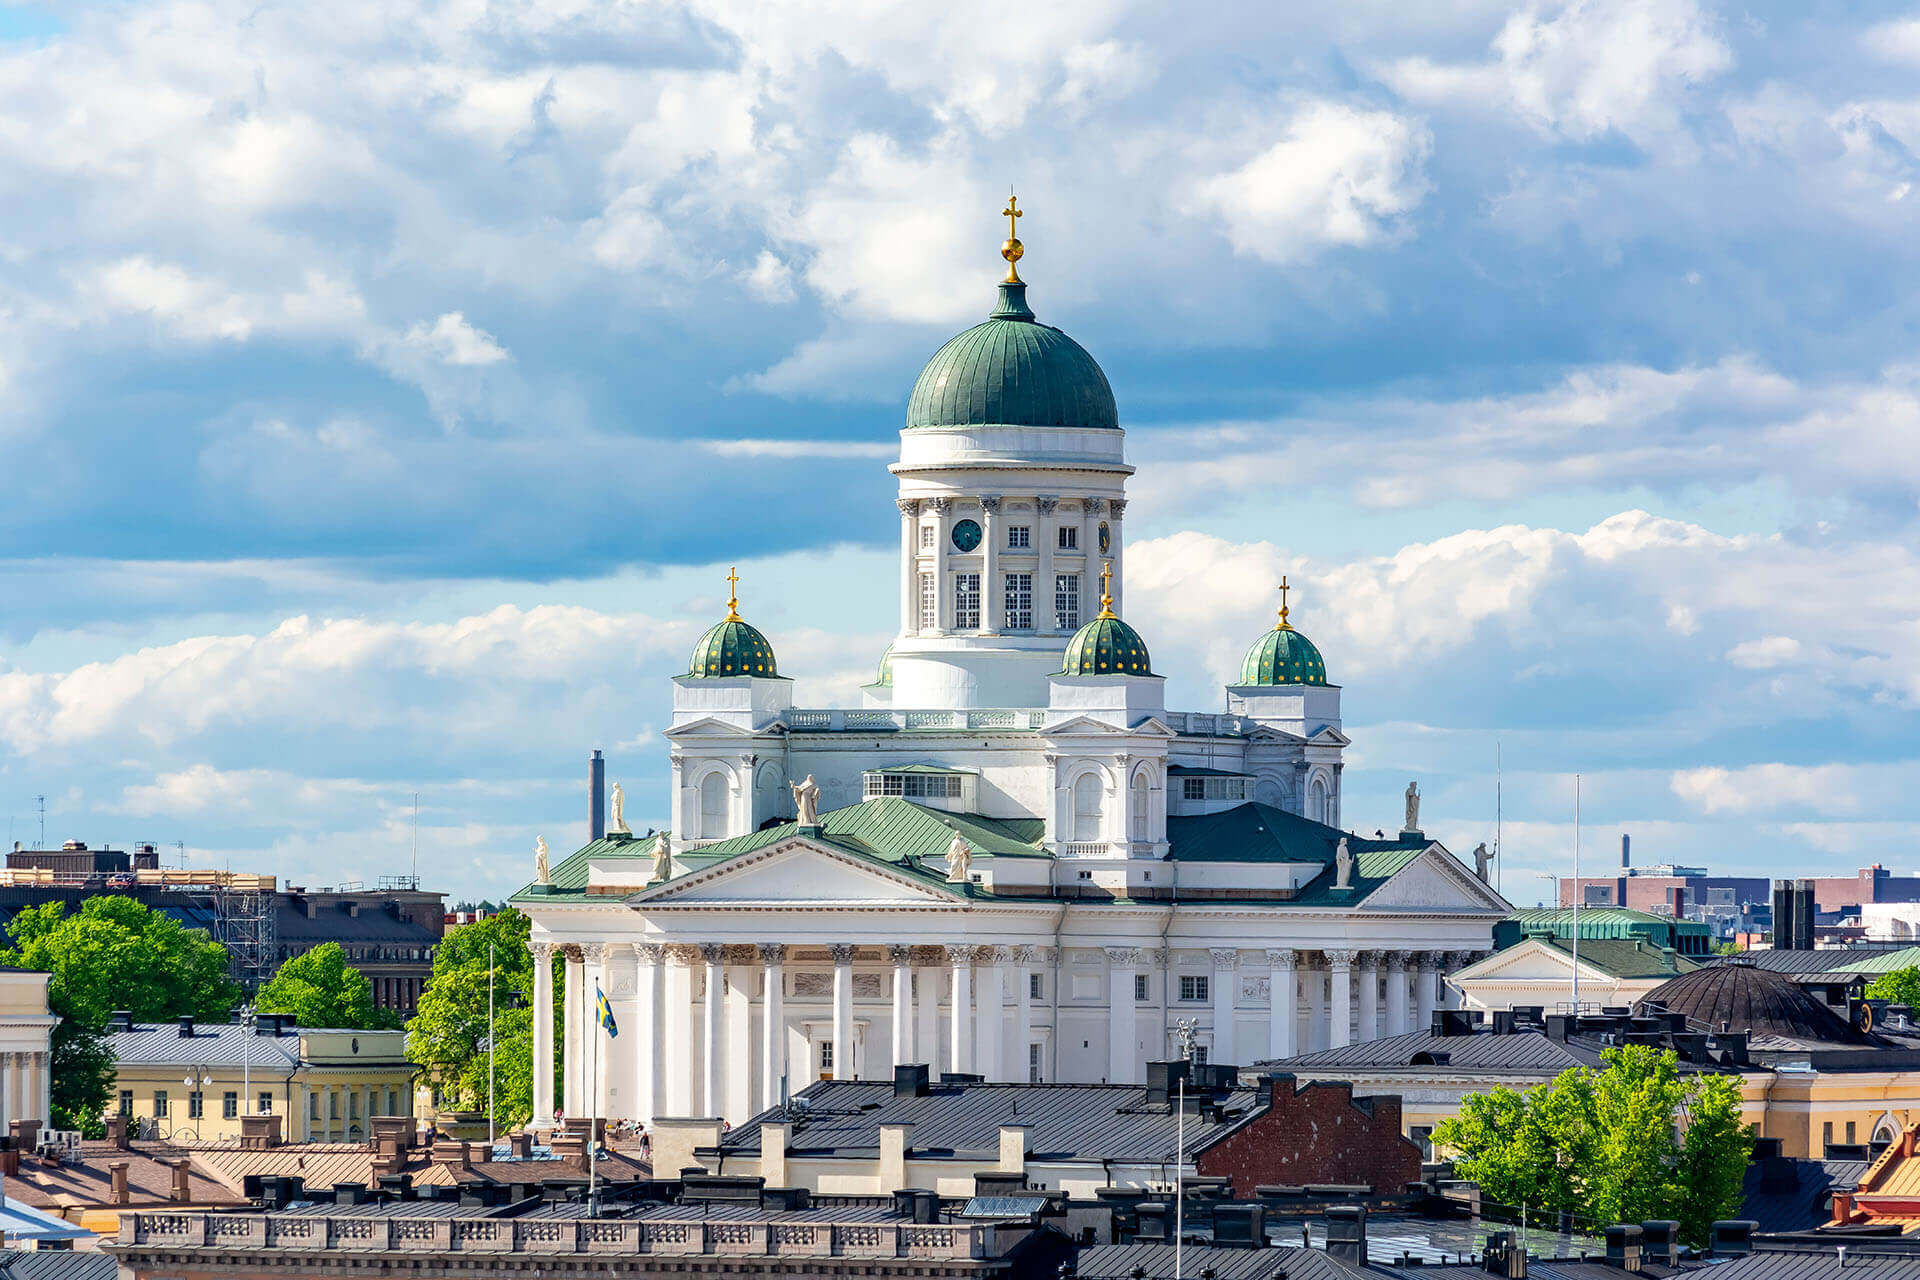 Finland: Immigration Changes to Reception Act and Reduced Fees